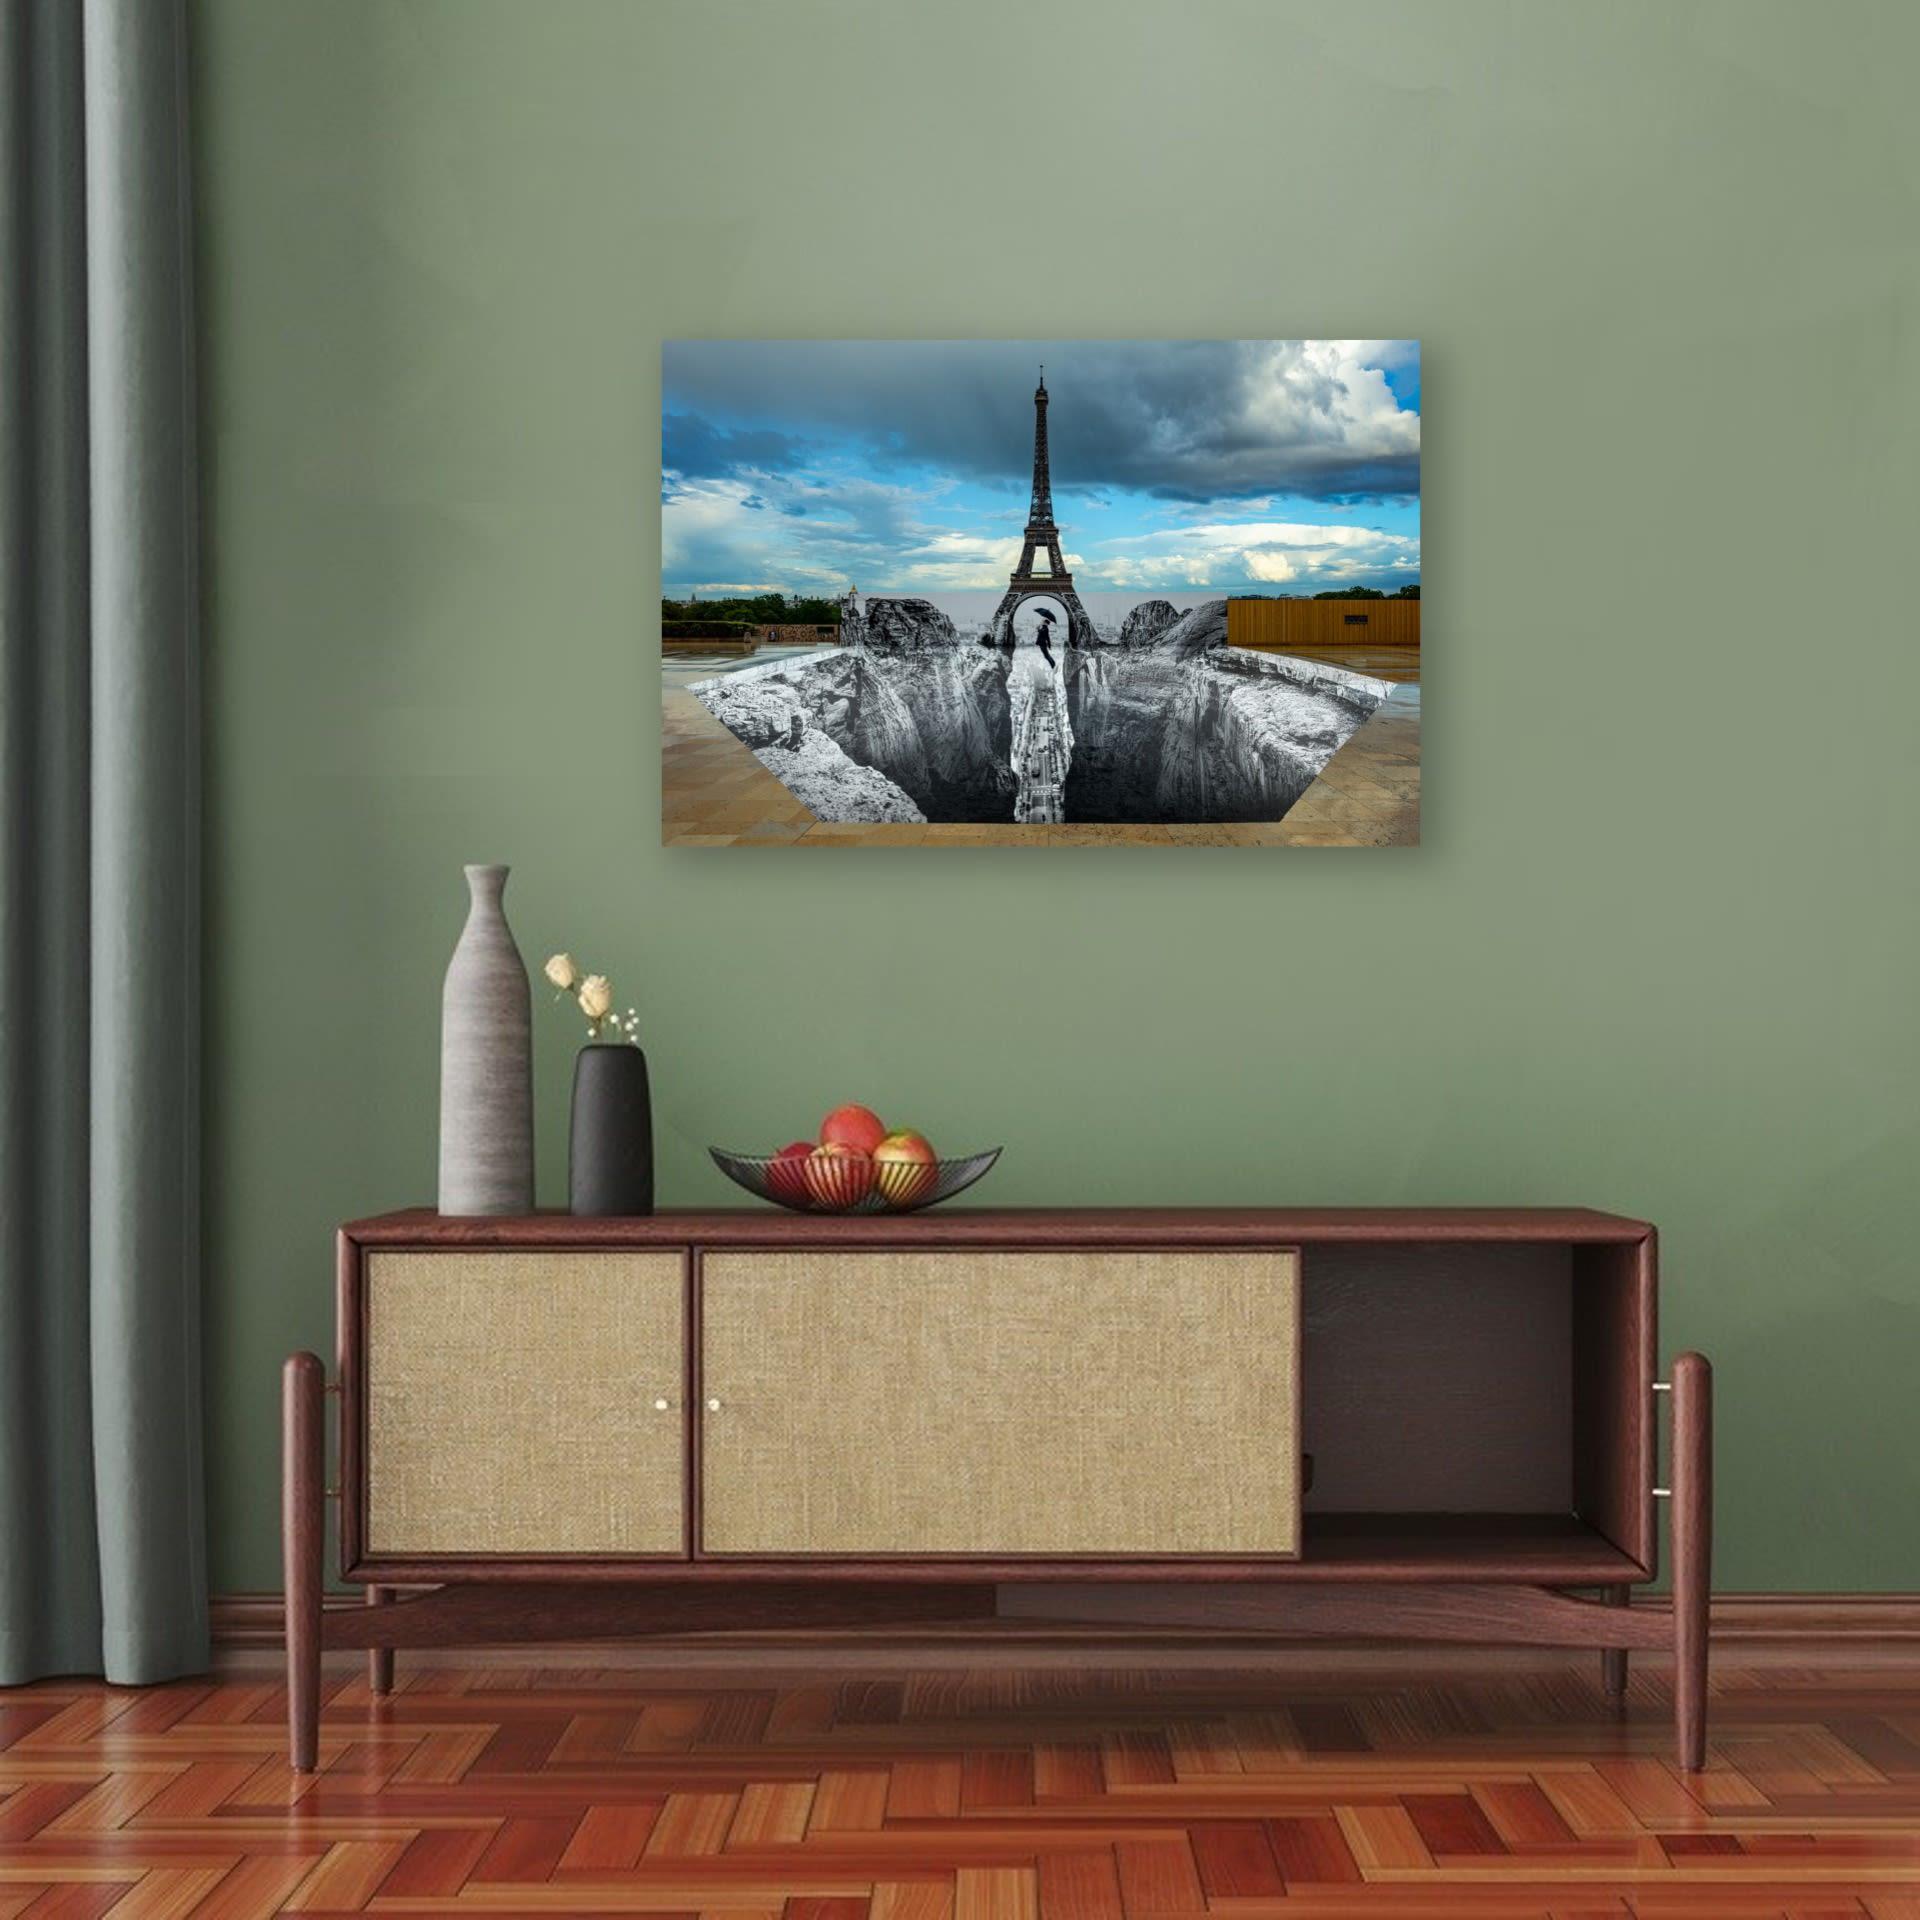 JR
Trompe l'oeil, Les Falaises du Trocadéro, 18 mai 2021, 19h58, Paris, France, 2021
2021
Giclée Print Laminated with G-gloss, Mounted on 3mm Dibond
64 × 96 cm
(25.2 × 37.8 in)
In mint condition

Signed by JR on the bottom right corner (stamp and